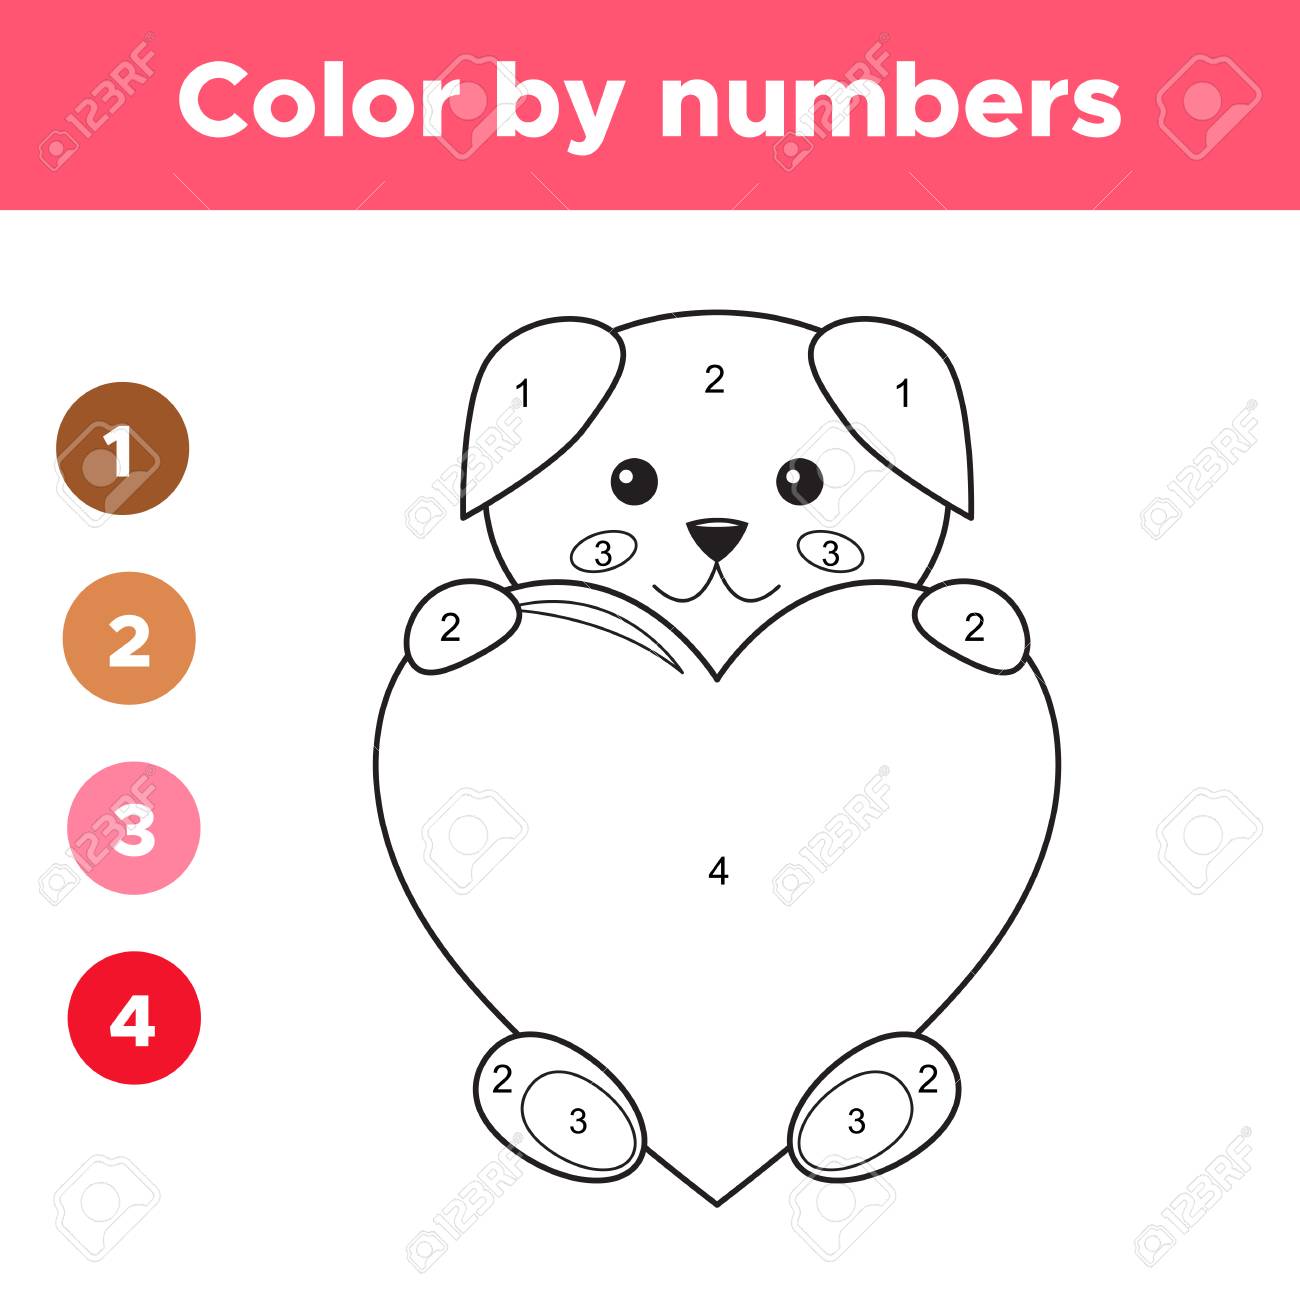 Color by numbers for preschool kids valentines day cartoon kawaii dog with big heart coloring page or book educational math game vector illustration royalty free svg cliparts vectors and stock illustration image